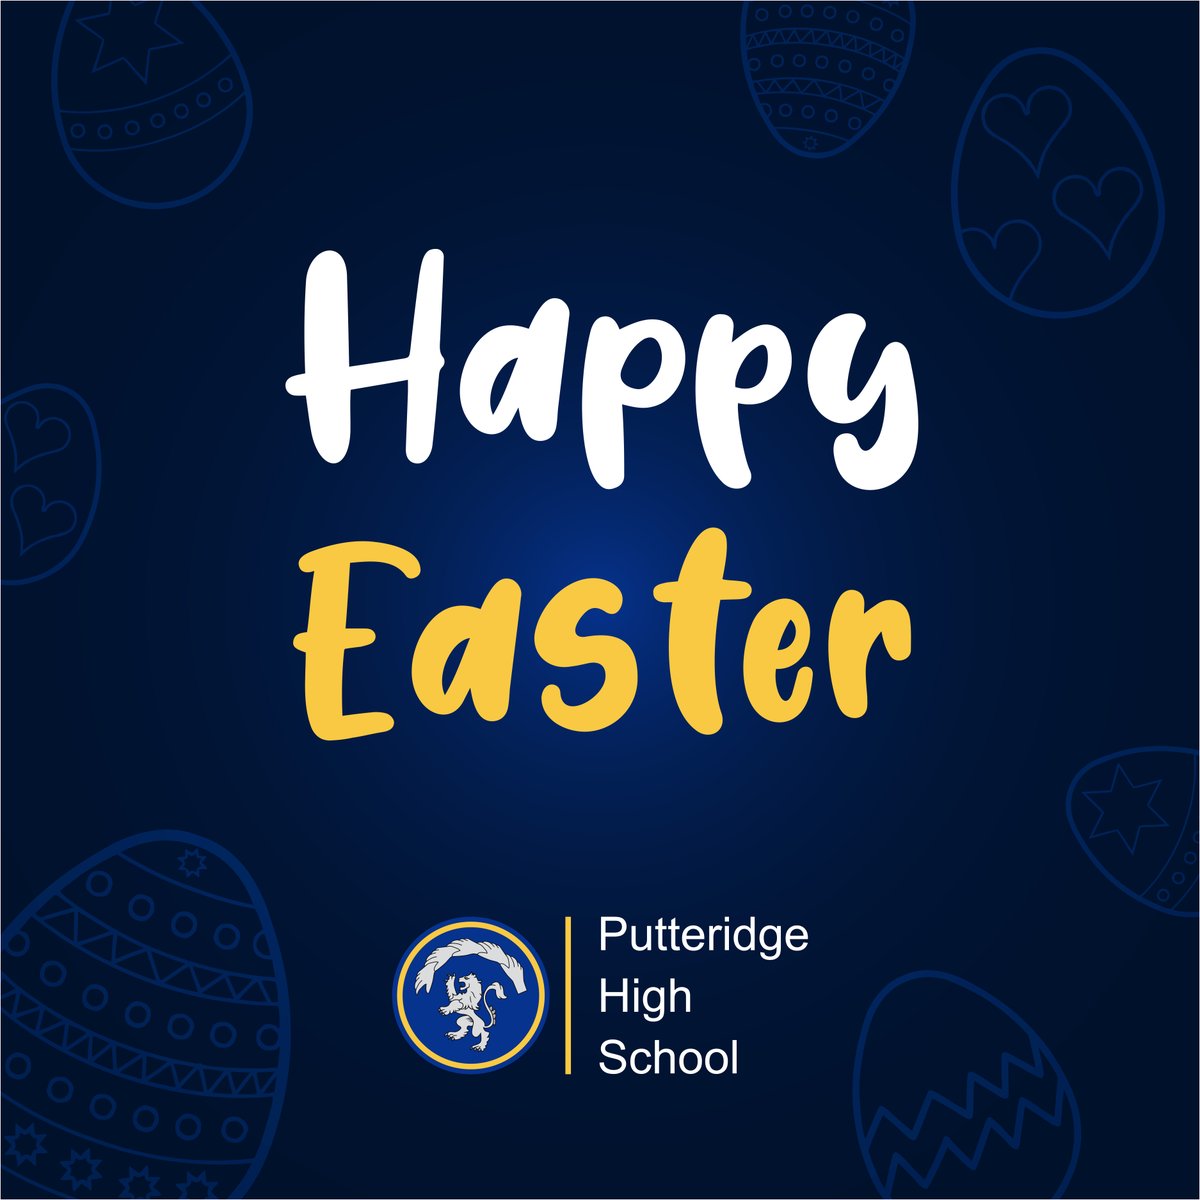 We wish everyone celebrating today a happy and joy filled Easter!